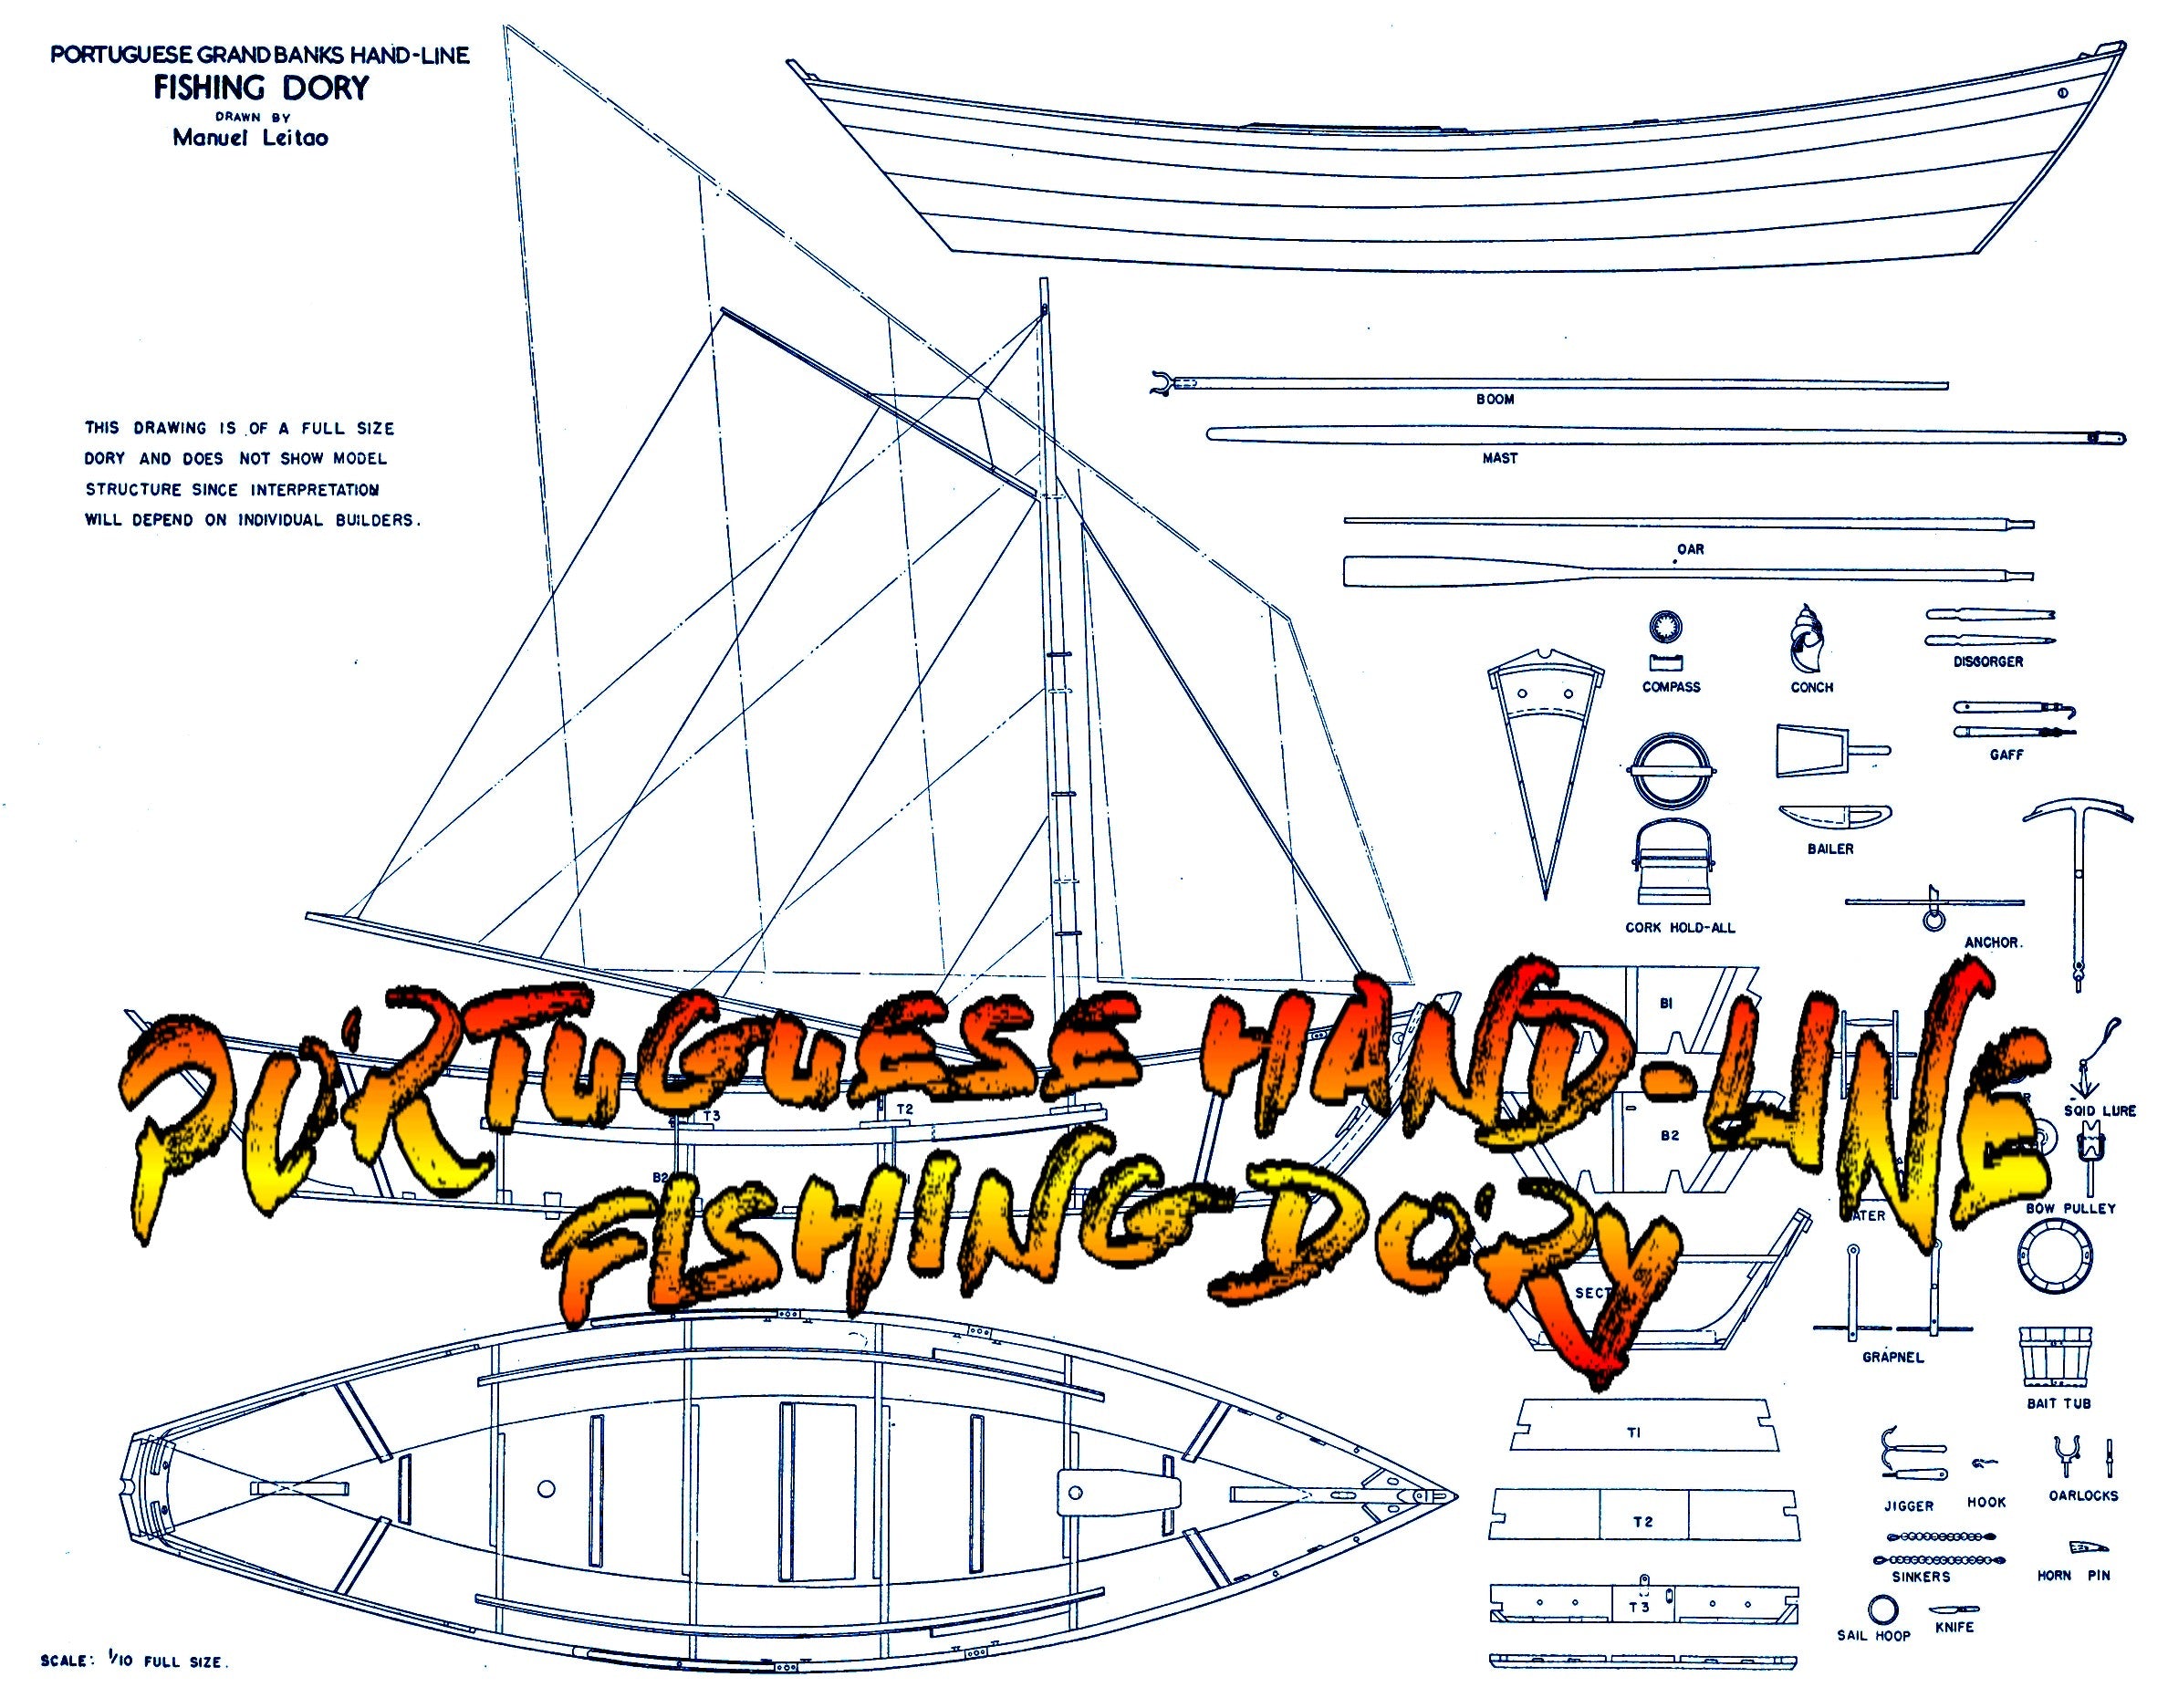 full size plans scale 1/10 portuguese hand-line fishing dory